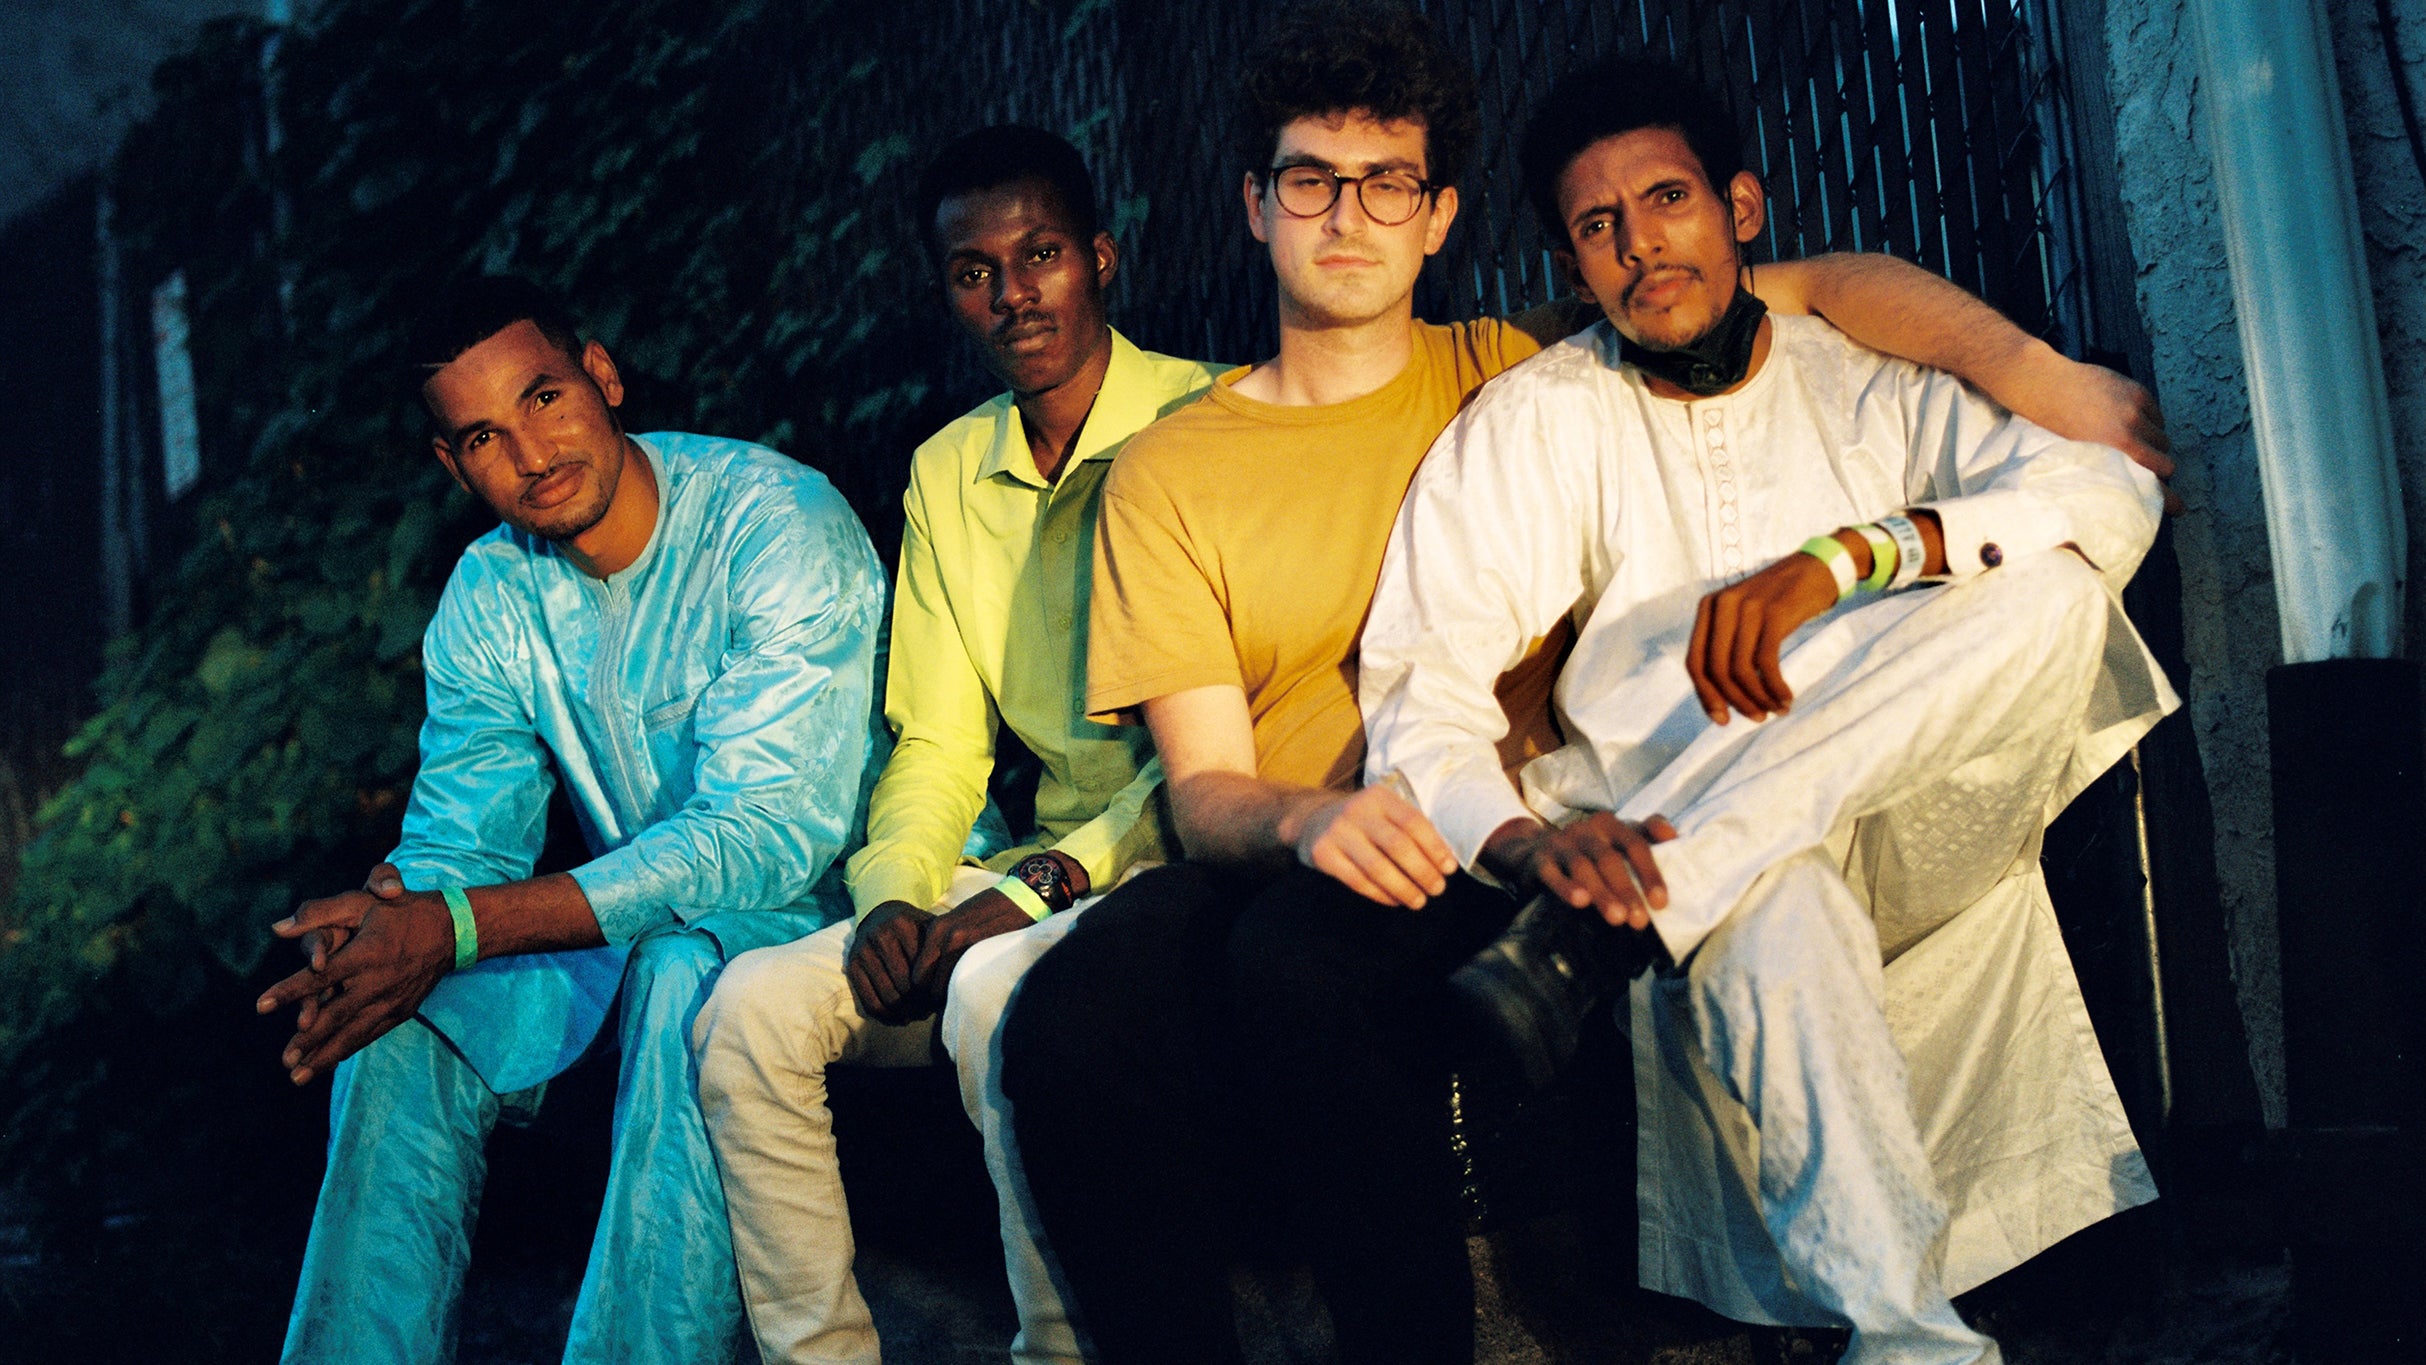 Mdou Moctar free presale info for concert tickets in Brooklyn, NY (Warsaw)